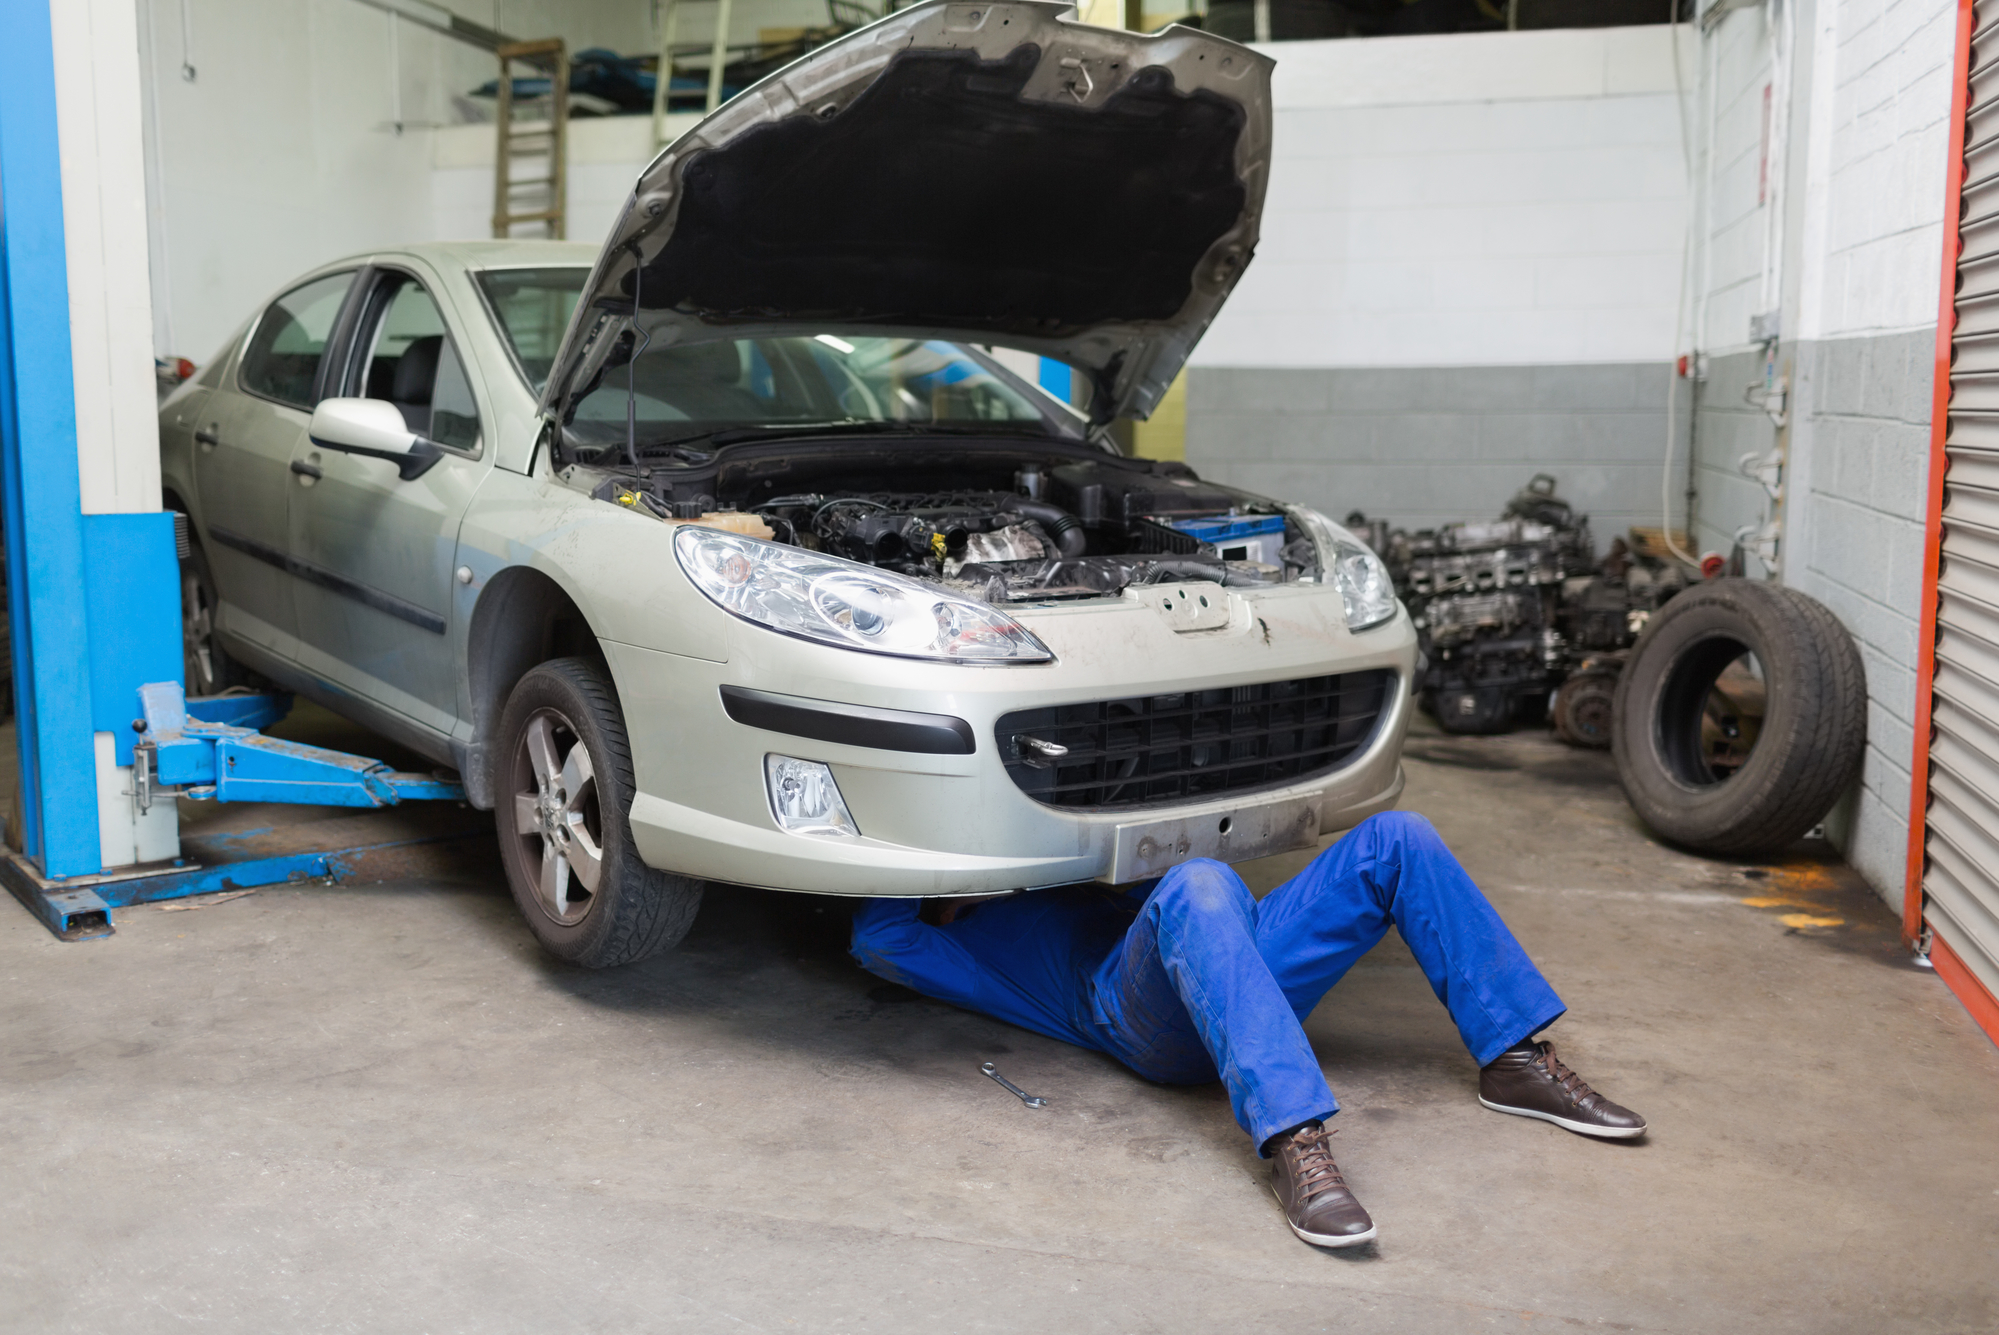 How to Diagnose Common Car Problems